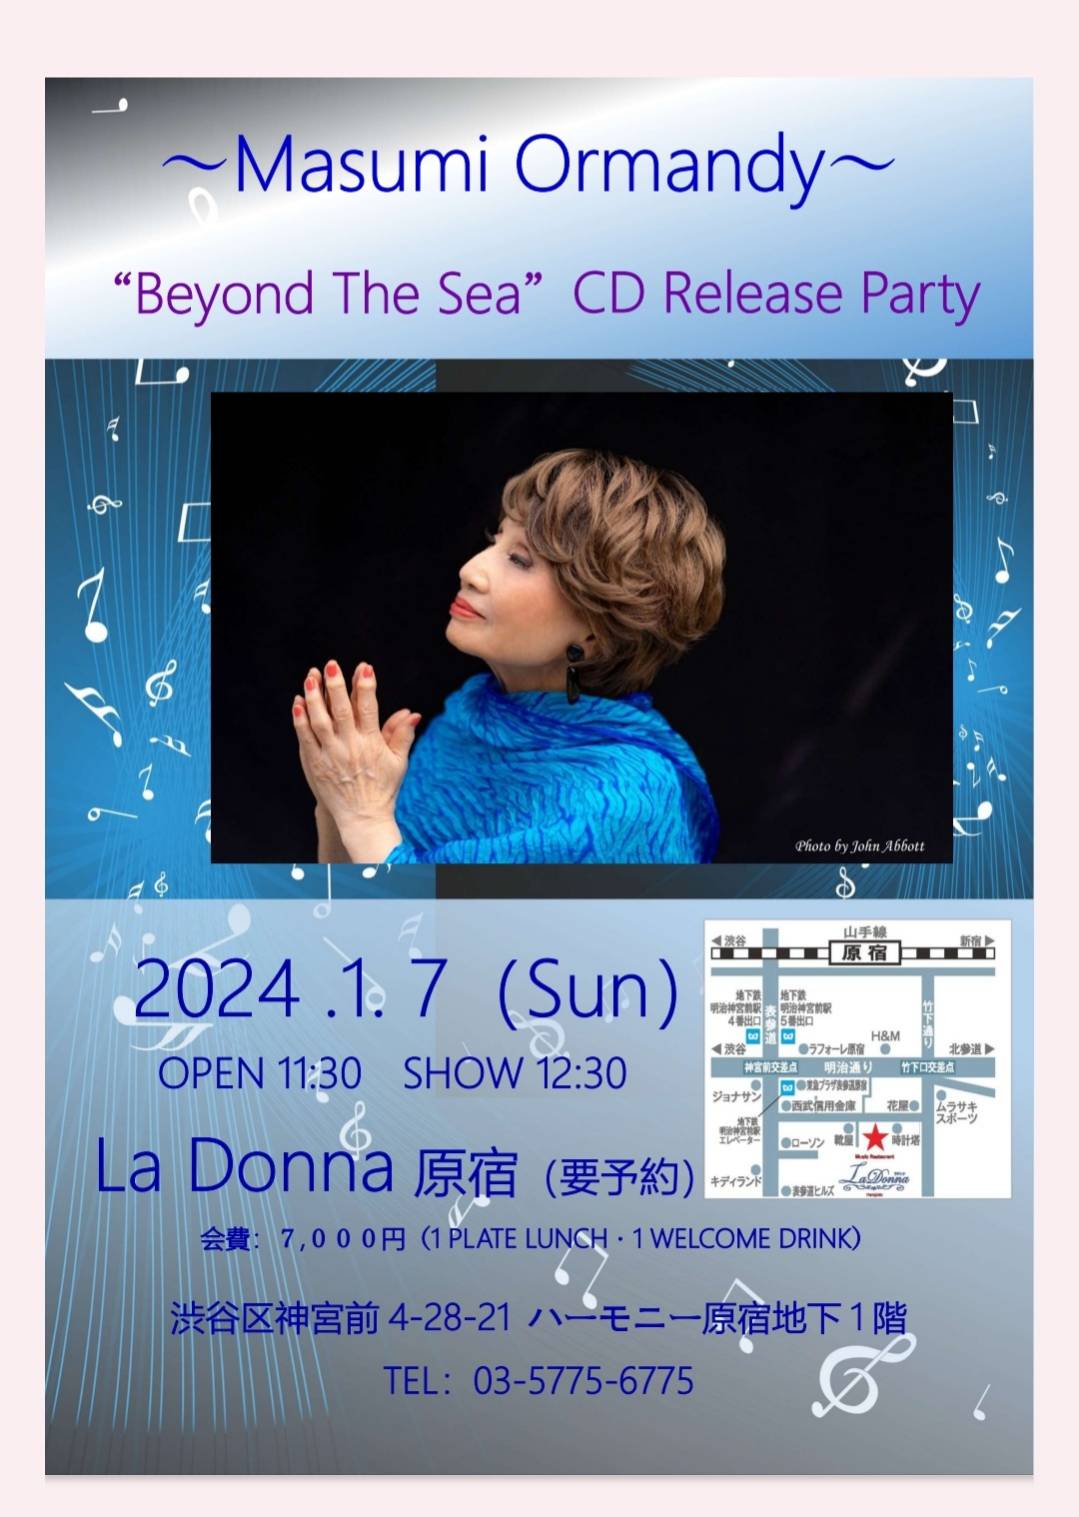 ～Masumi Ormandy～  "Beyond The Sea"  CD  Release Party